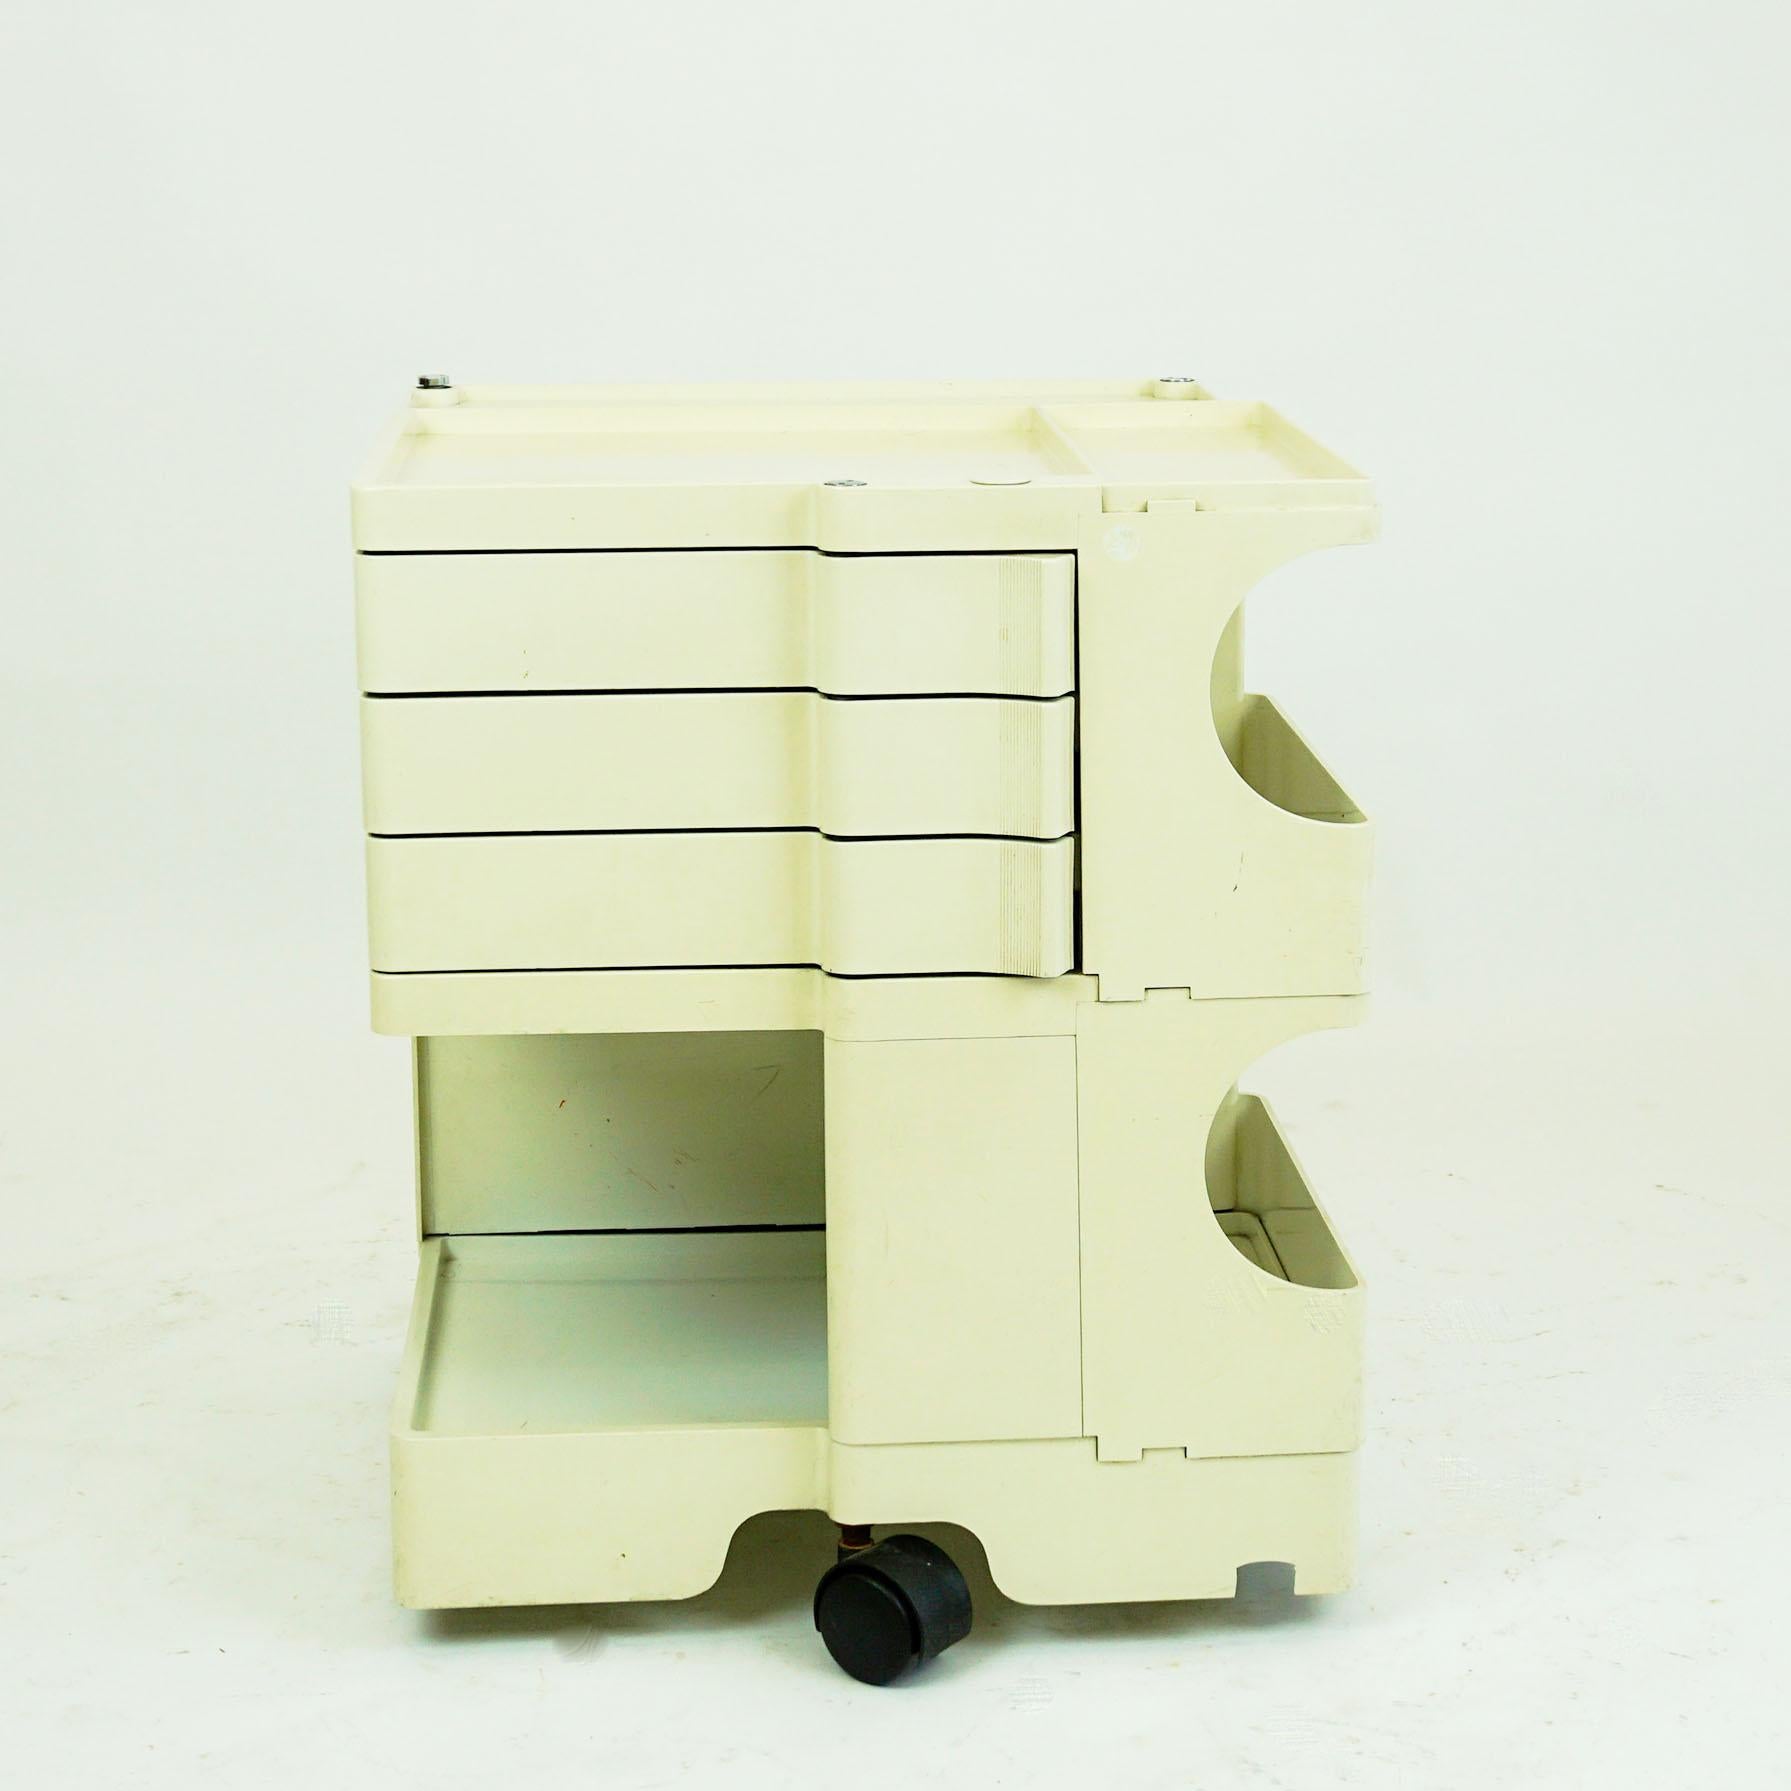 This “Boby” trolley or portable storage system was designed by Joe Colombo in 1969. It is still in production (B-line) and has always been very popular. A very handy trolley made of ABS plastic. It has many storage options such as the fold-out